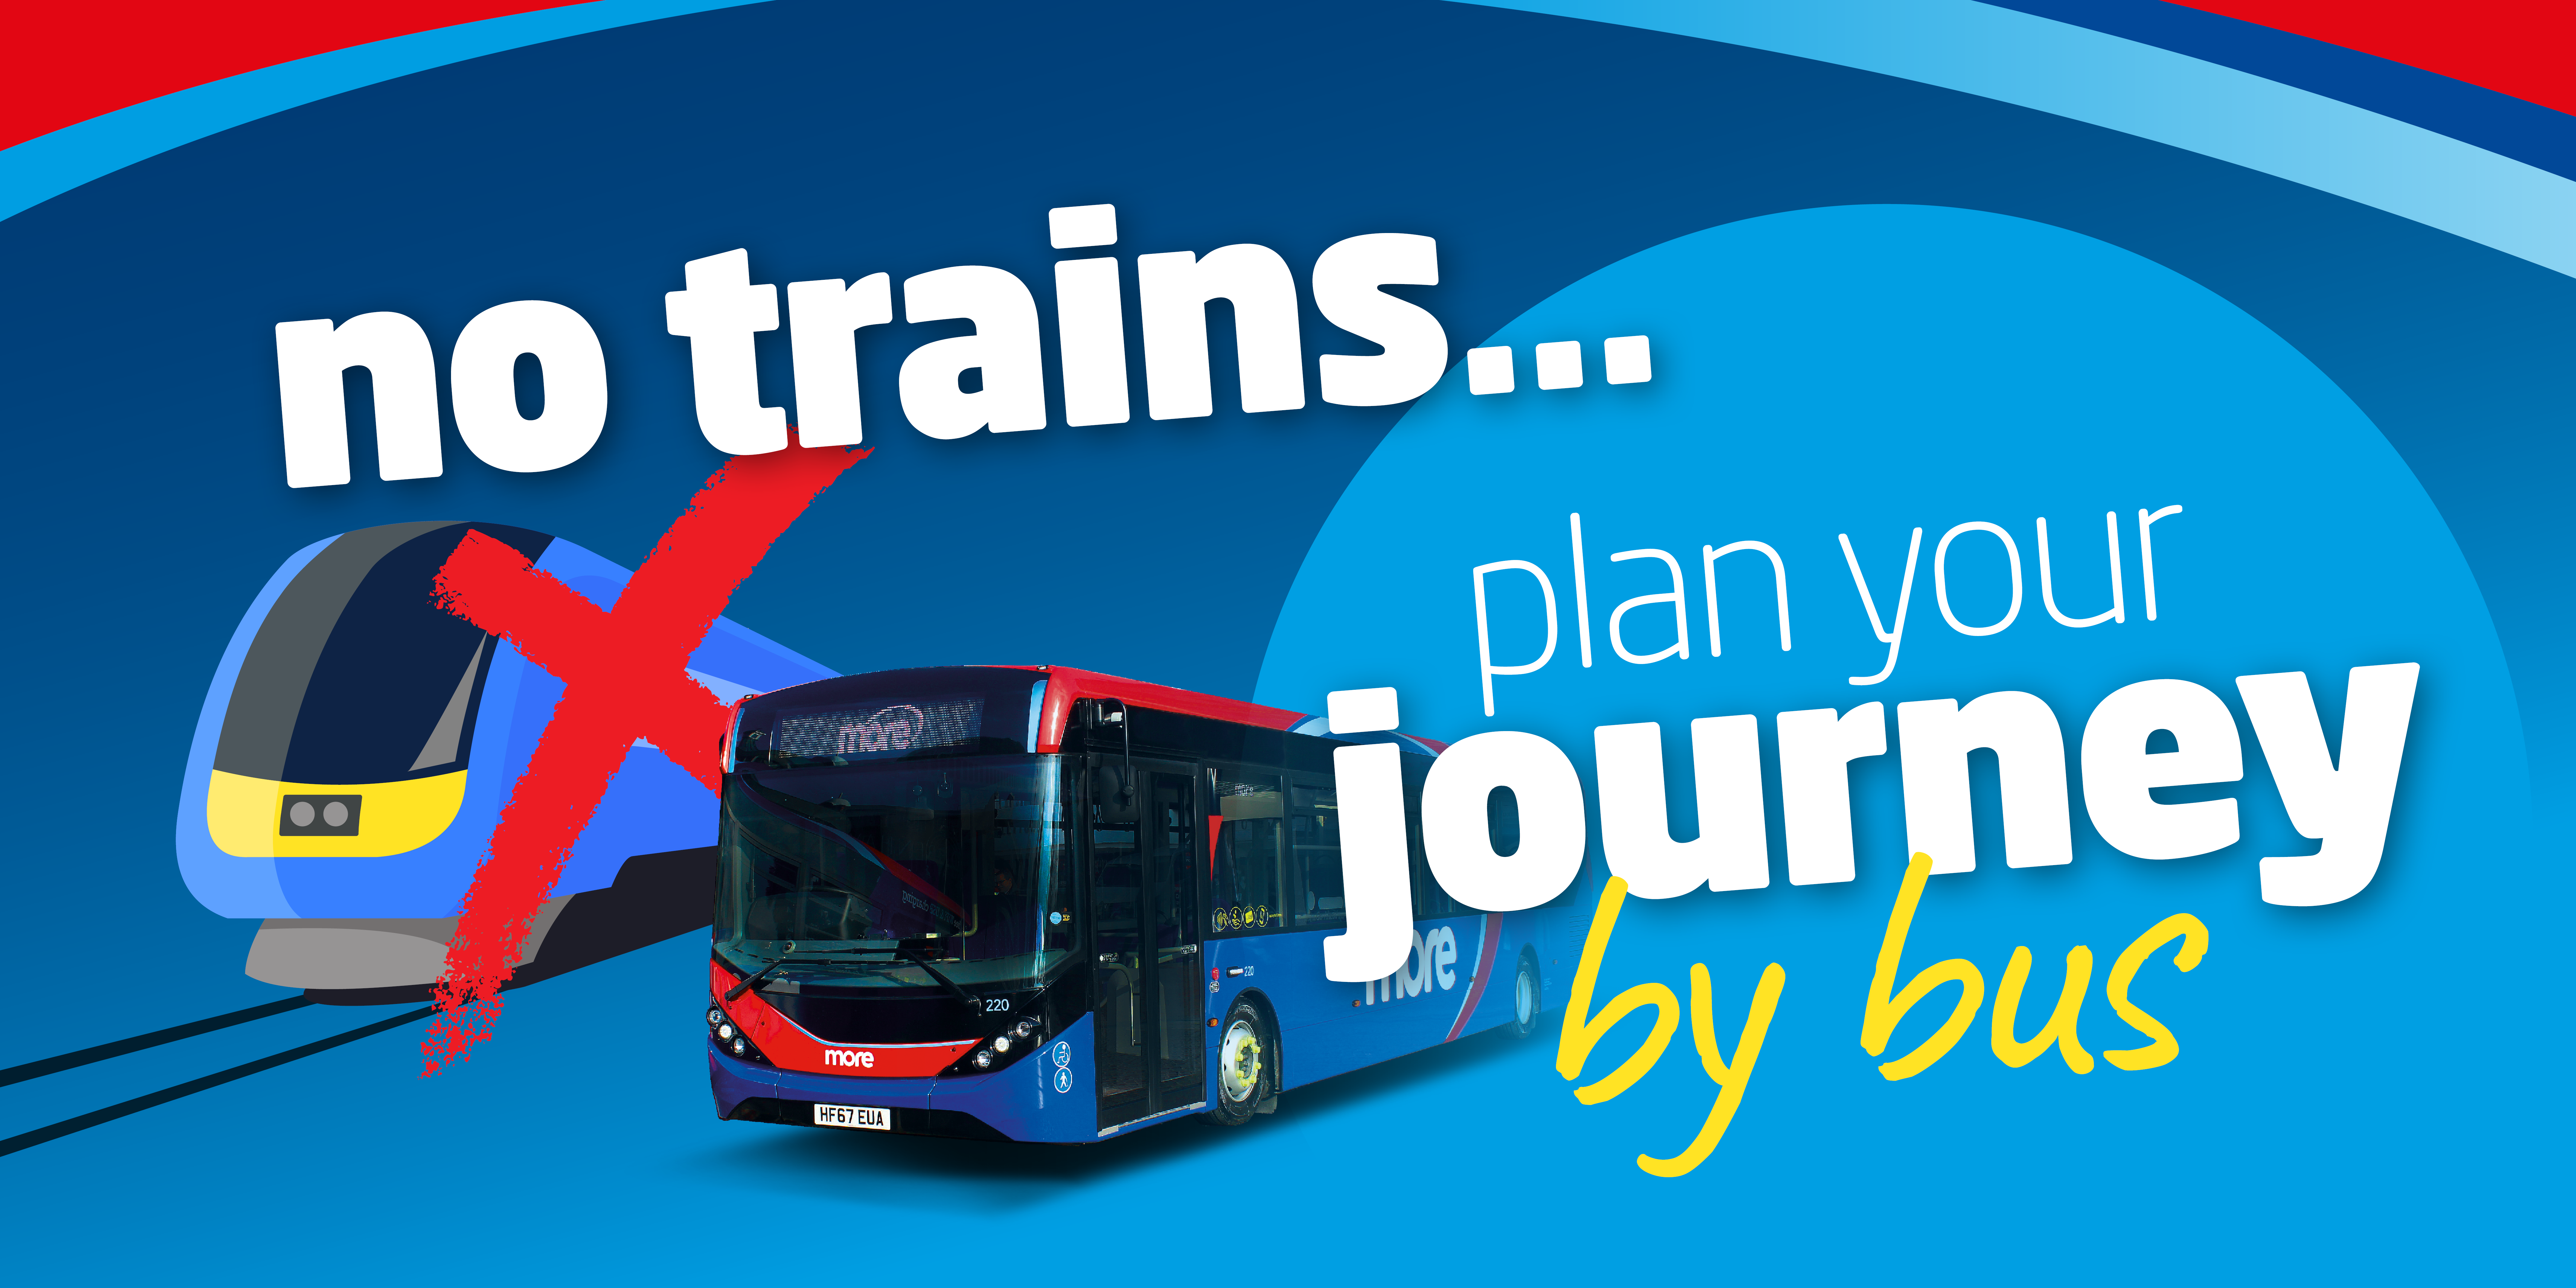 no trains...plan your journey by bus